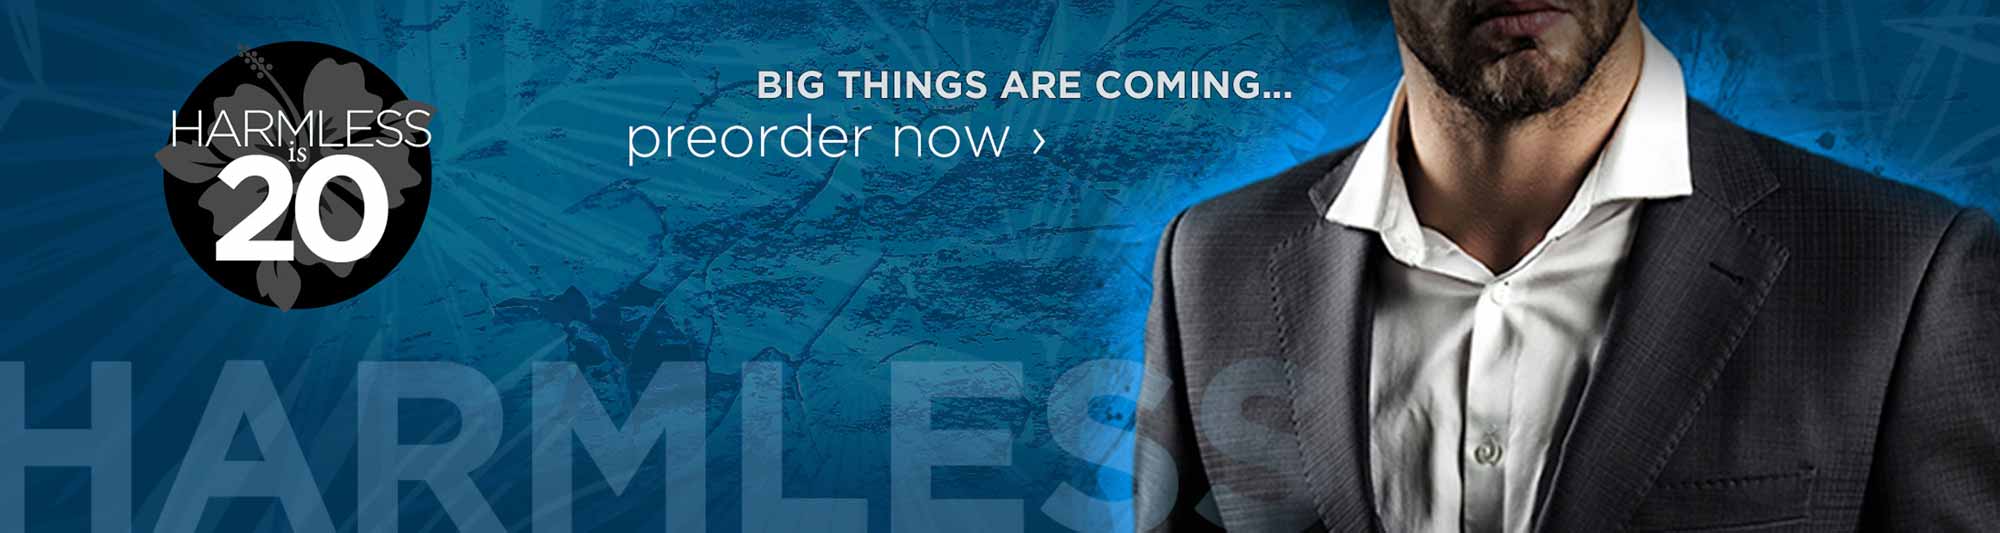 banner image: big things are coming... preorder harmless now